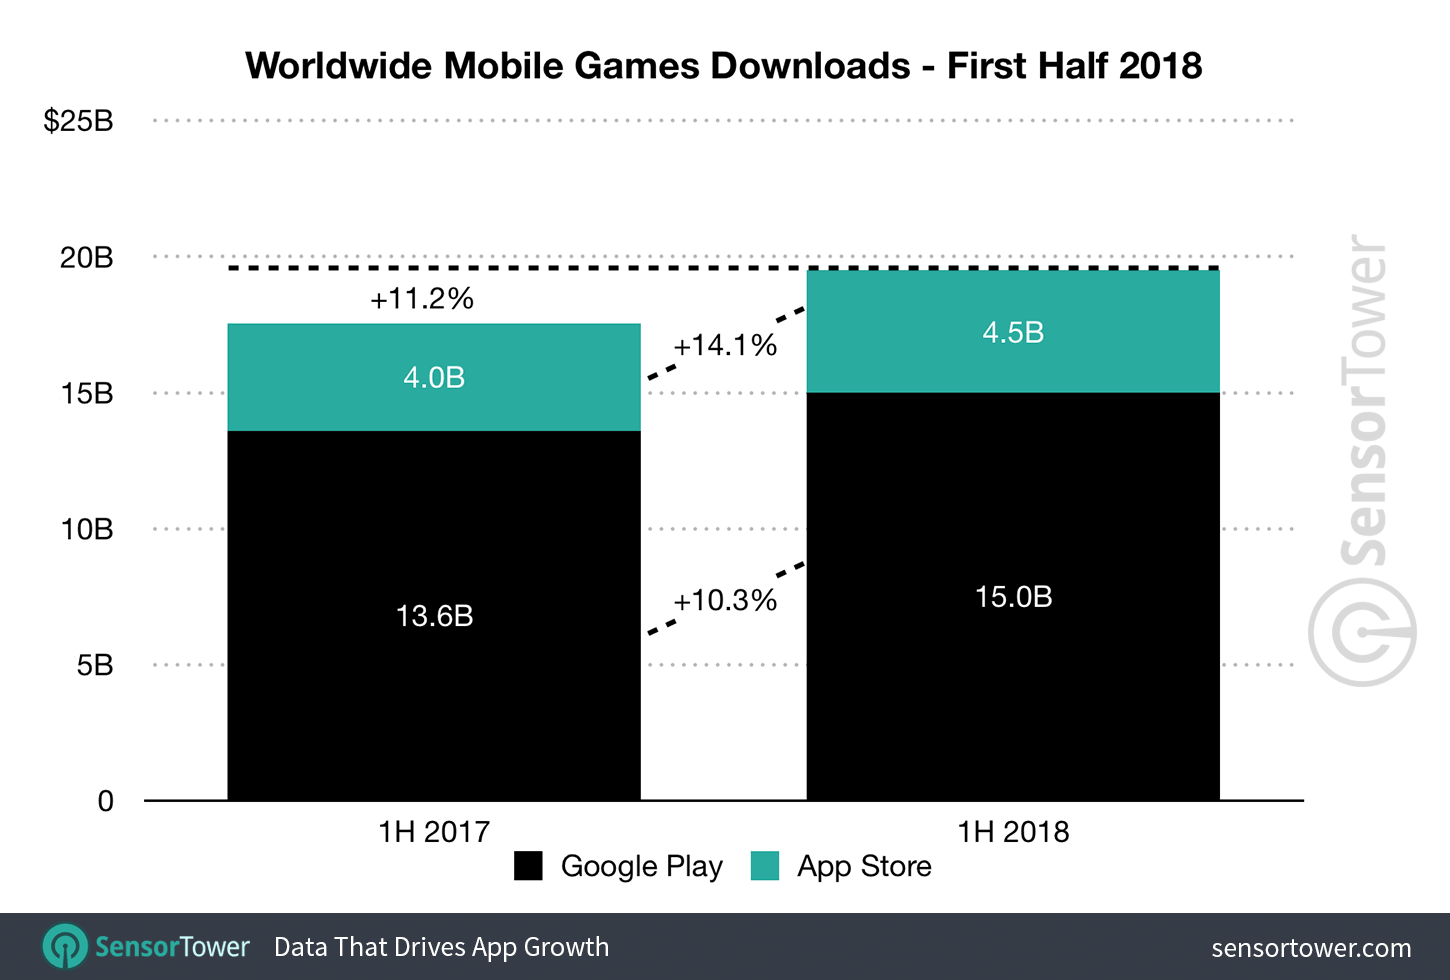 1H 2018 Mobile Game Downloads